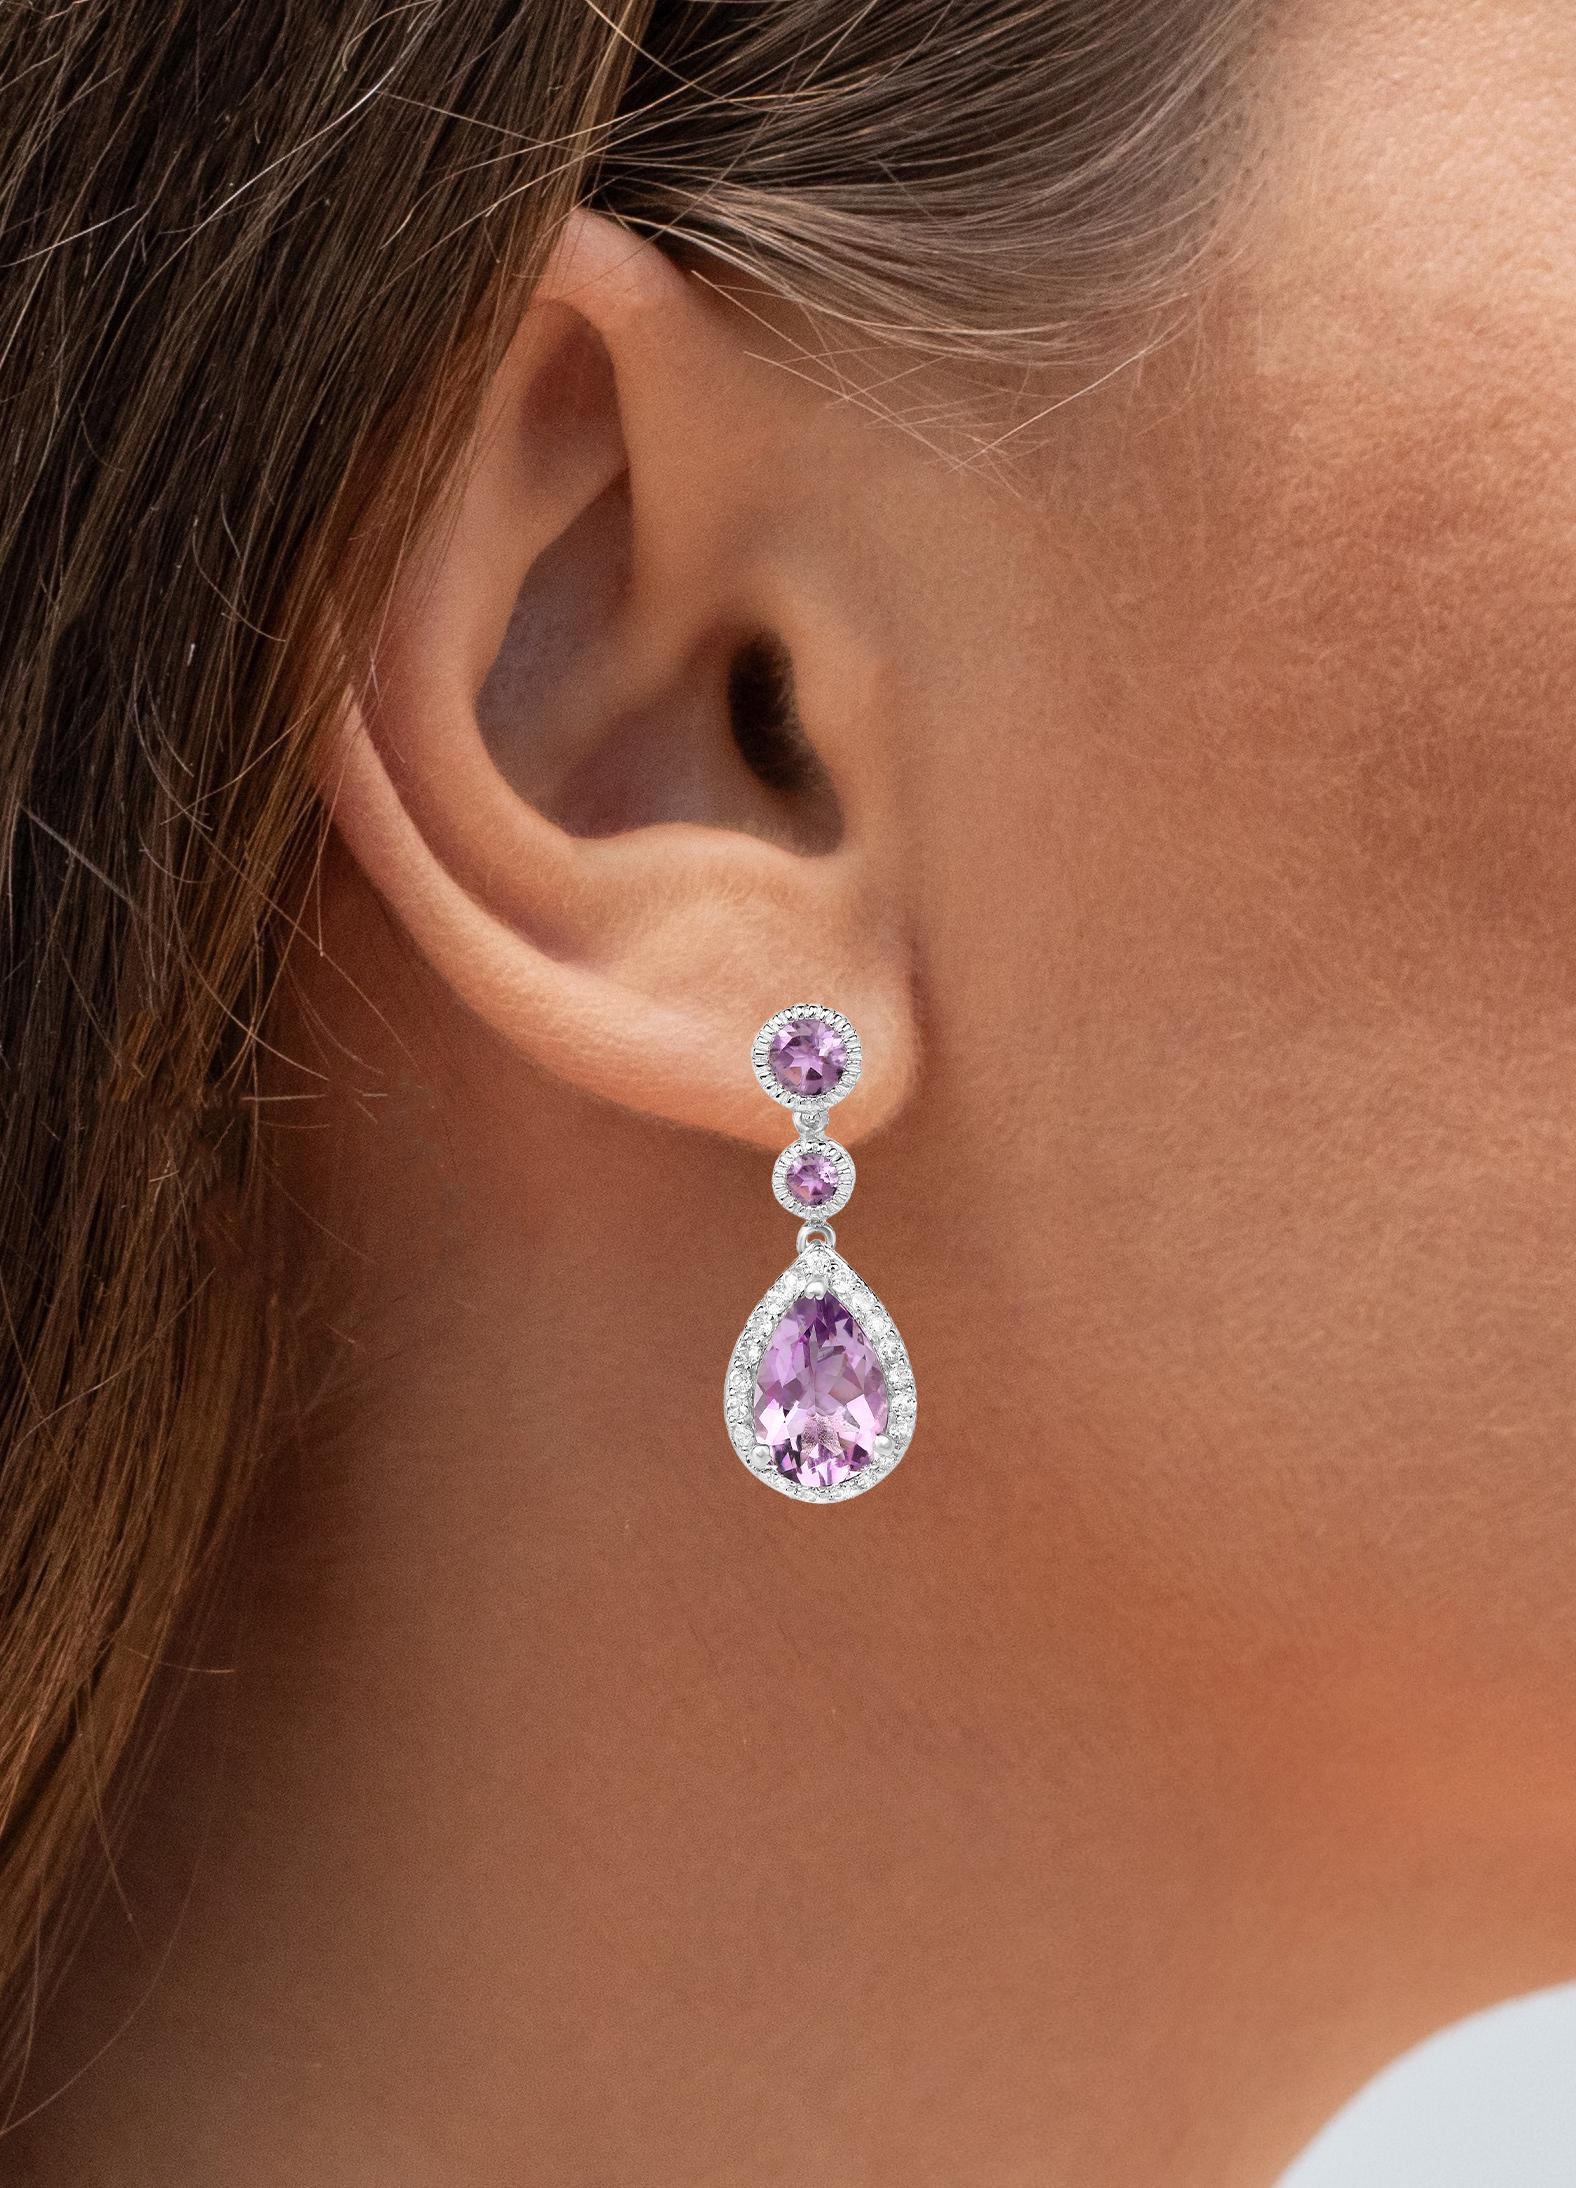 Contemporary Amethyst Earrings With White Topazes 7.16 Carats Rhodium Plated Sterling Silver For Sale